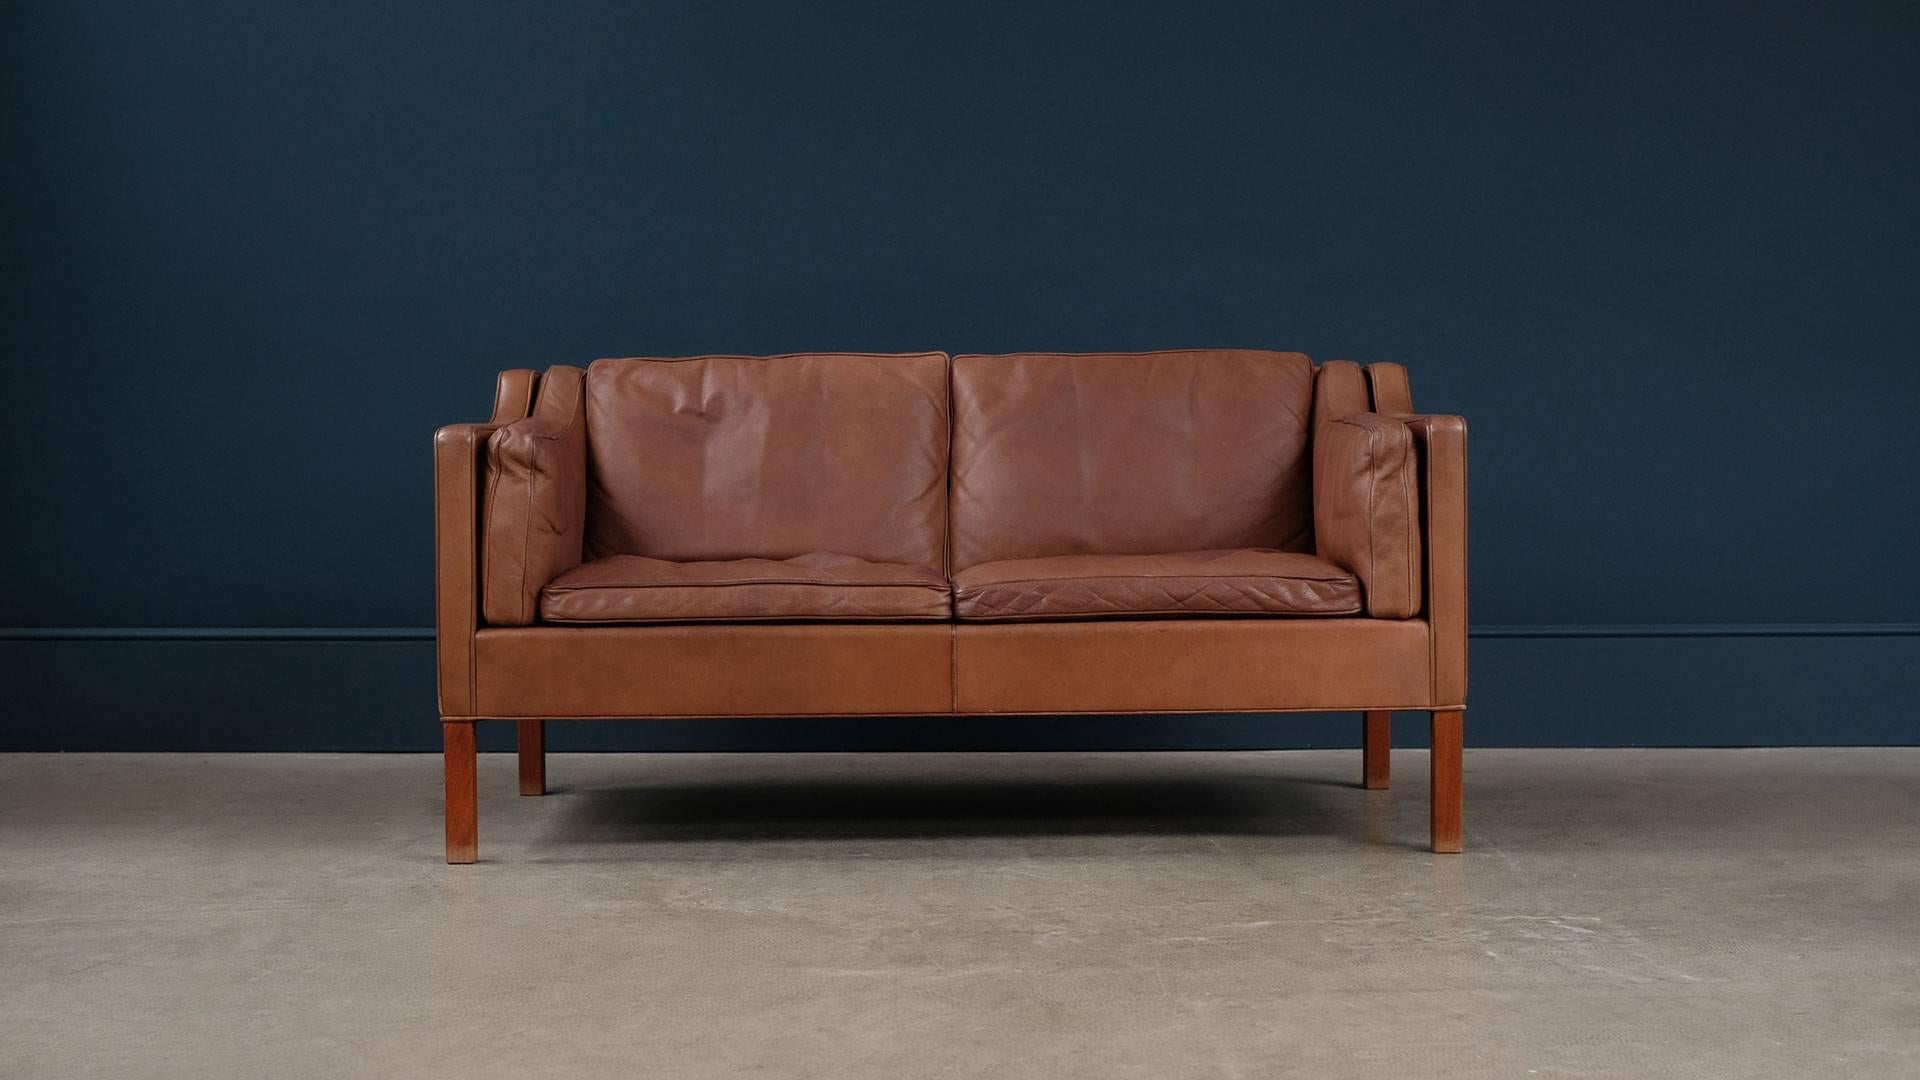 The real thing, fantastic example of the Classic two-seat sofa designed by Borge Mogensen for Fredericia, Denmark, model 2212. Unsurpassed quality and in beautiful brown leather with patina and teak legs. Great vintage example.